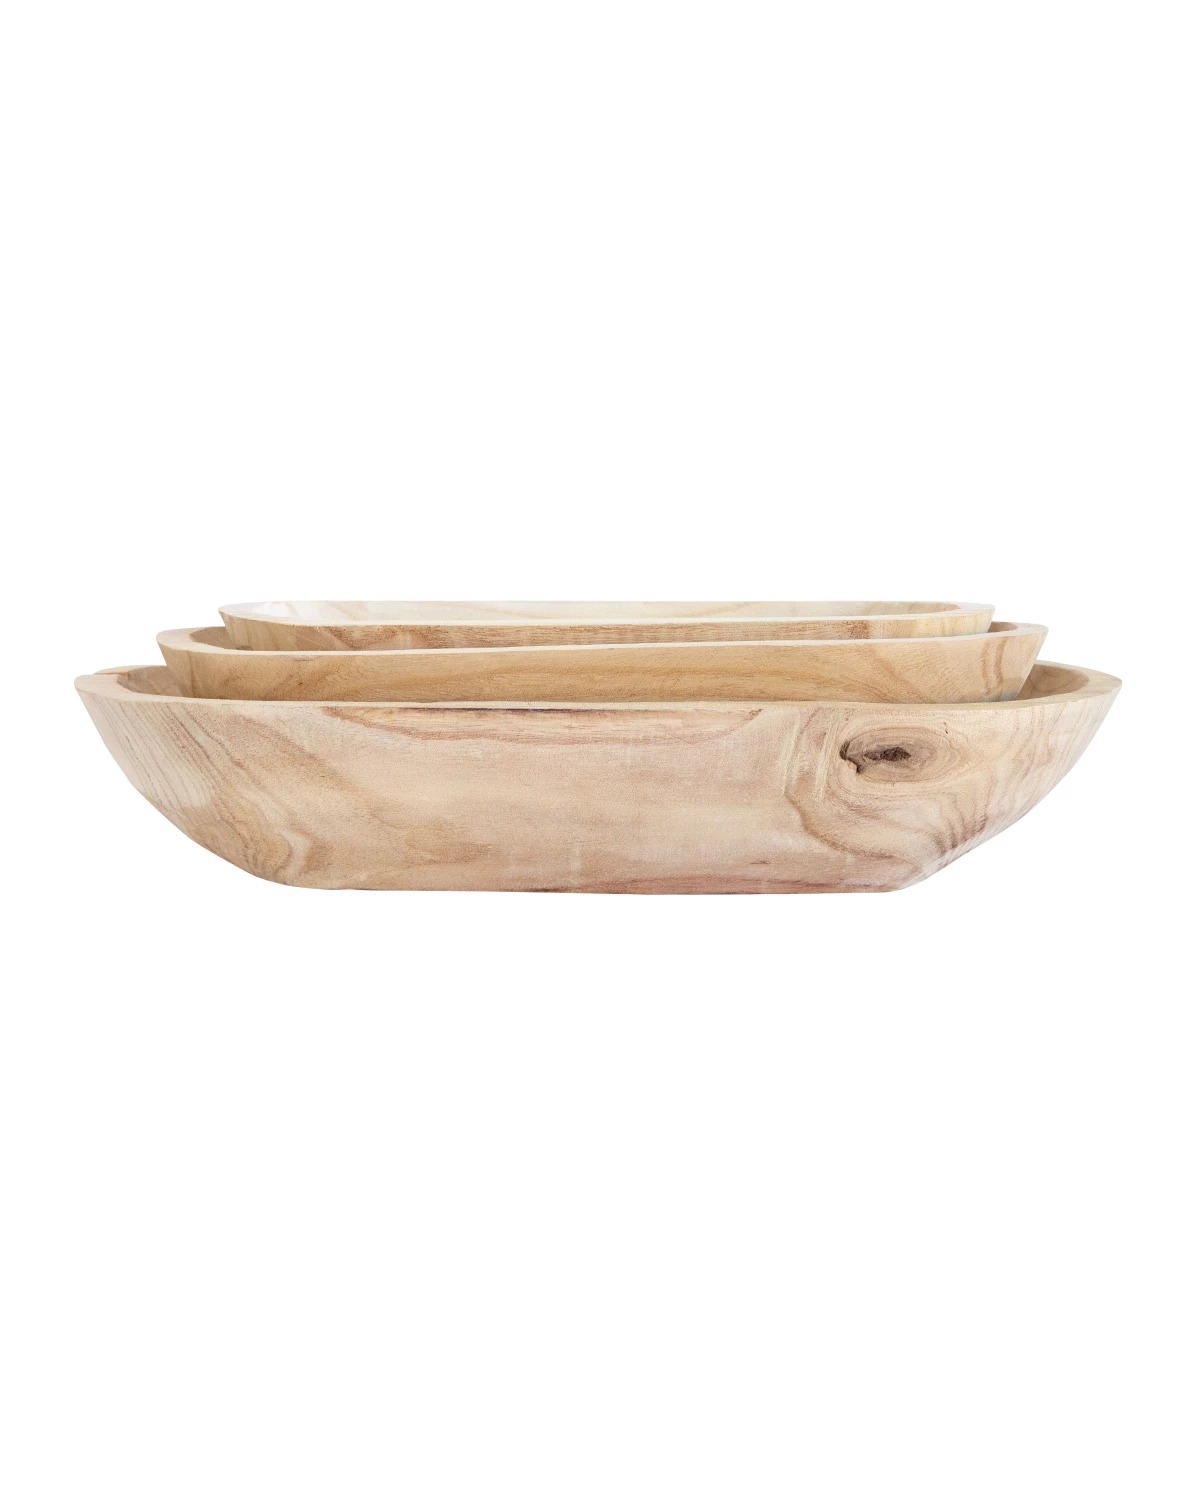 OBLONG BOWL - SMALL - Image 1